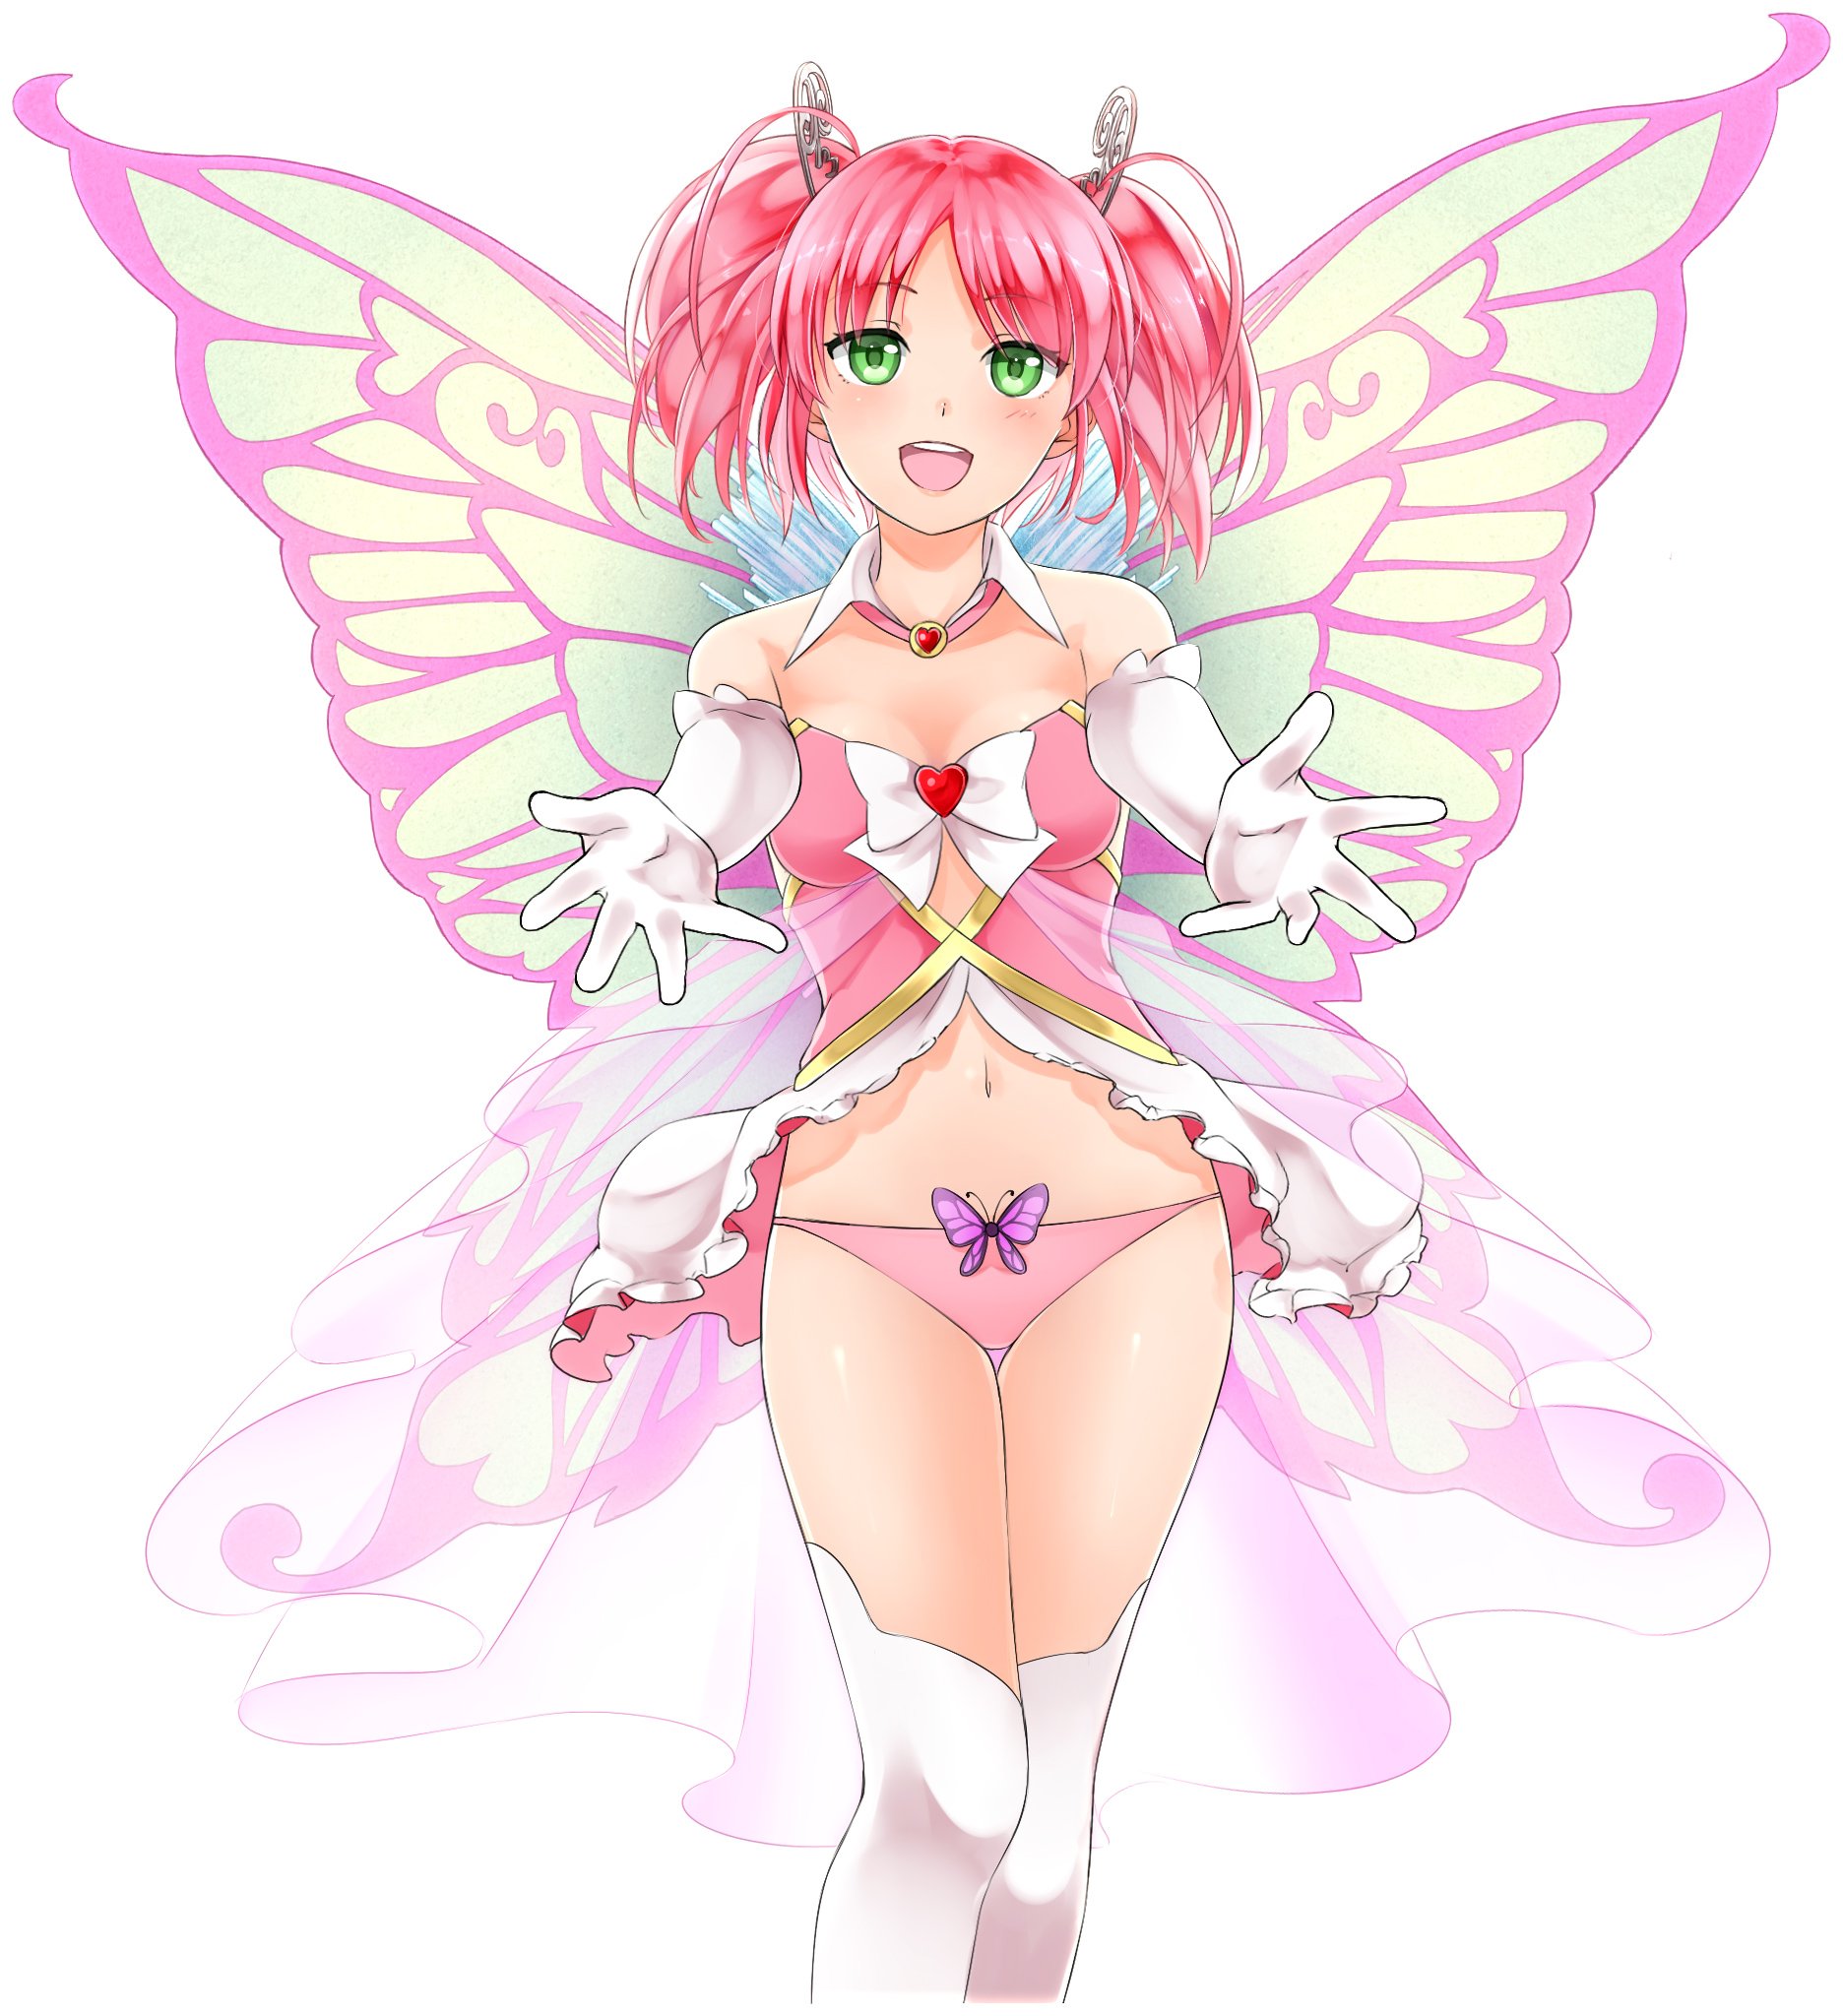 "Love fairy here to spread some love. ❤. And. 